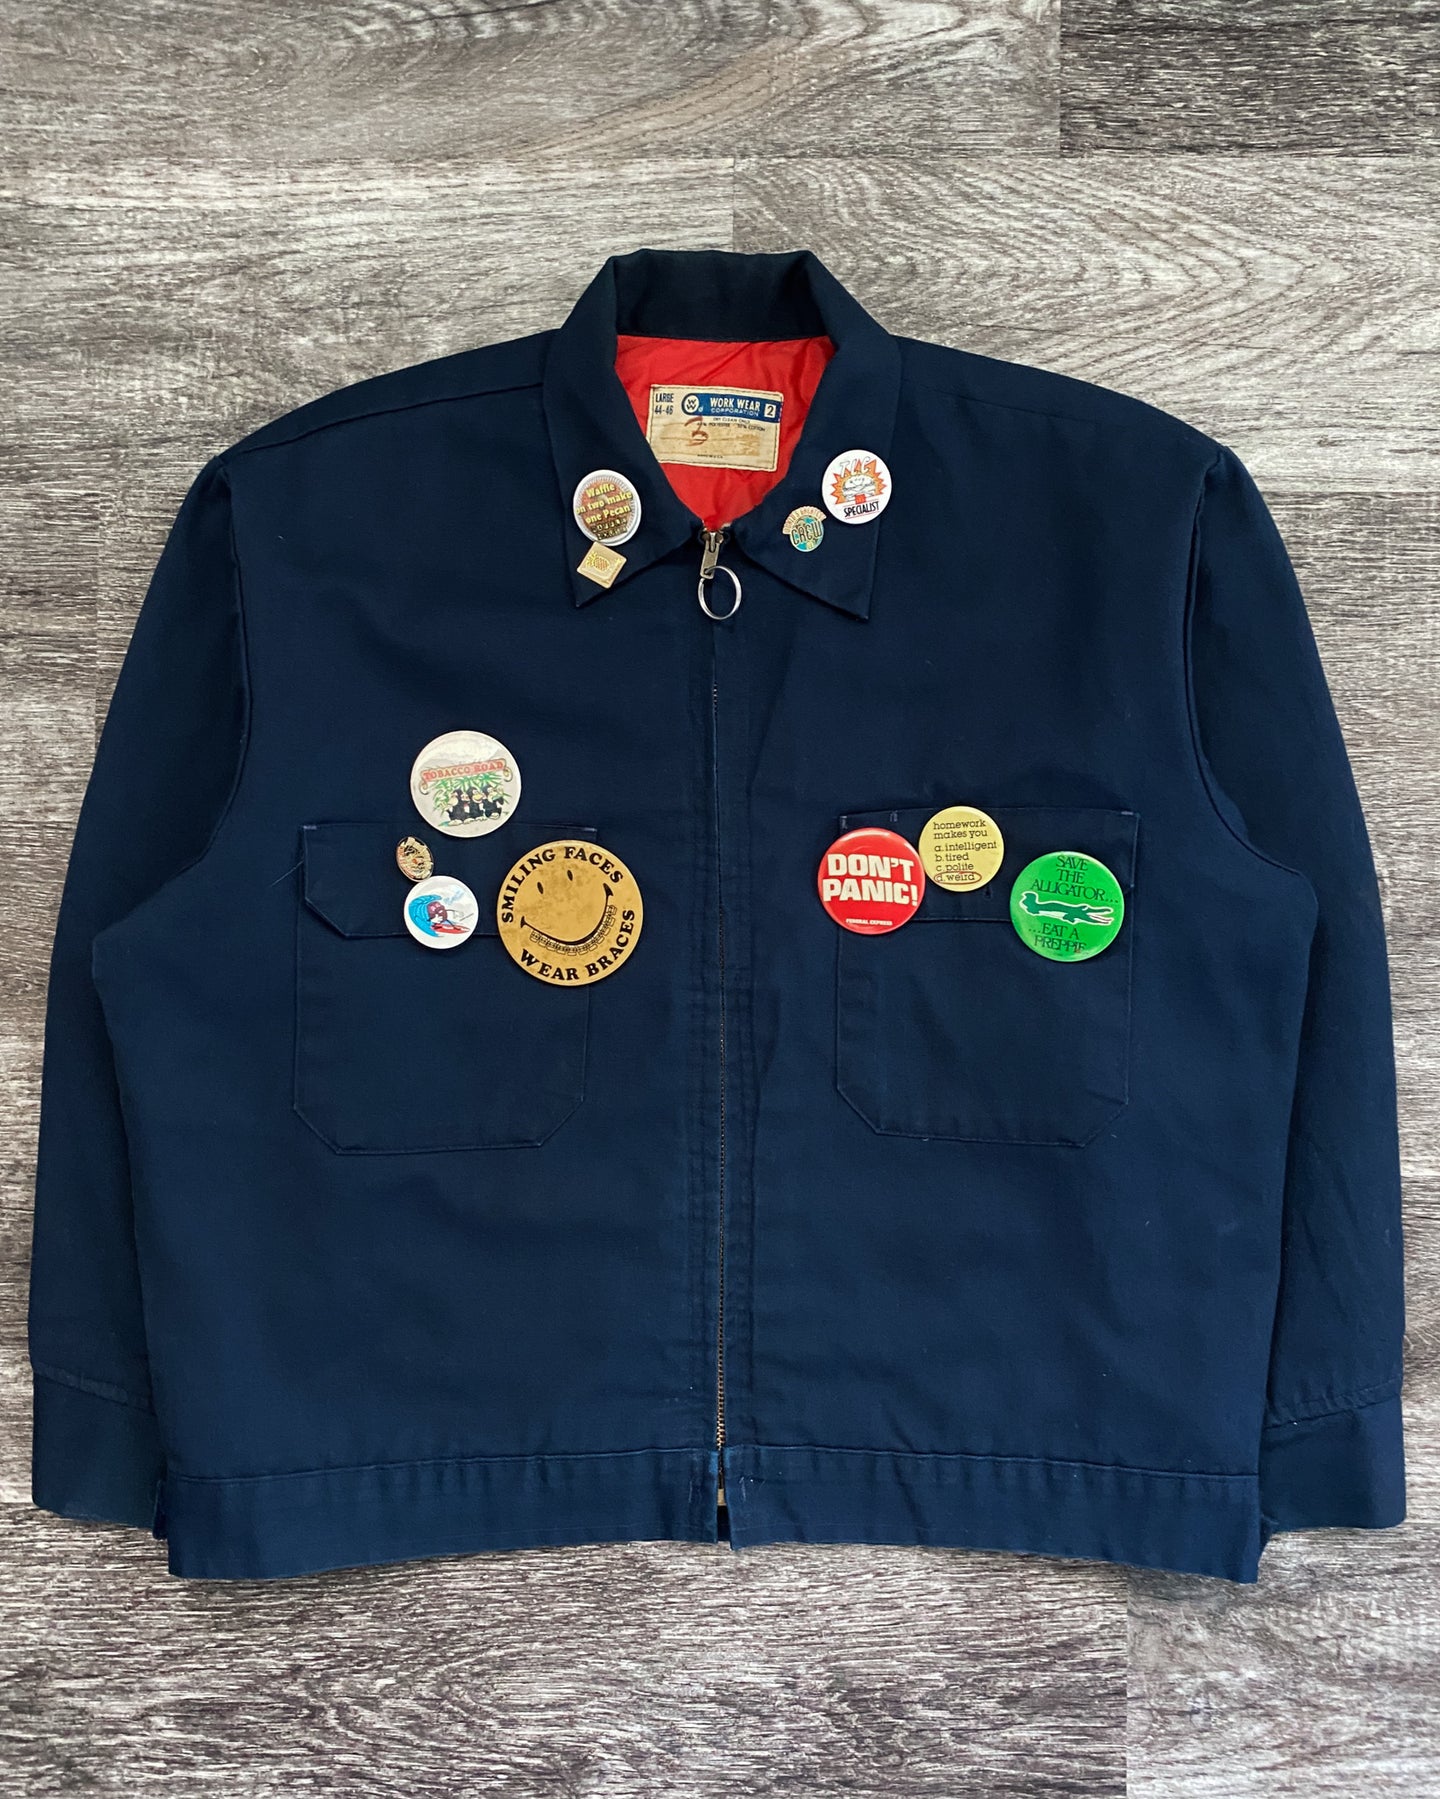 1970s Navy Work Jacket with Pins - Size Large